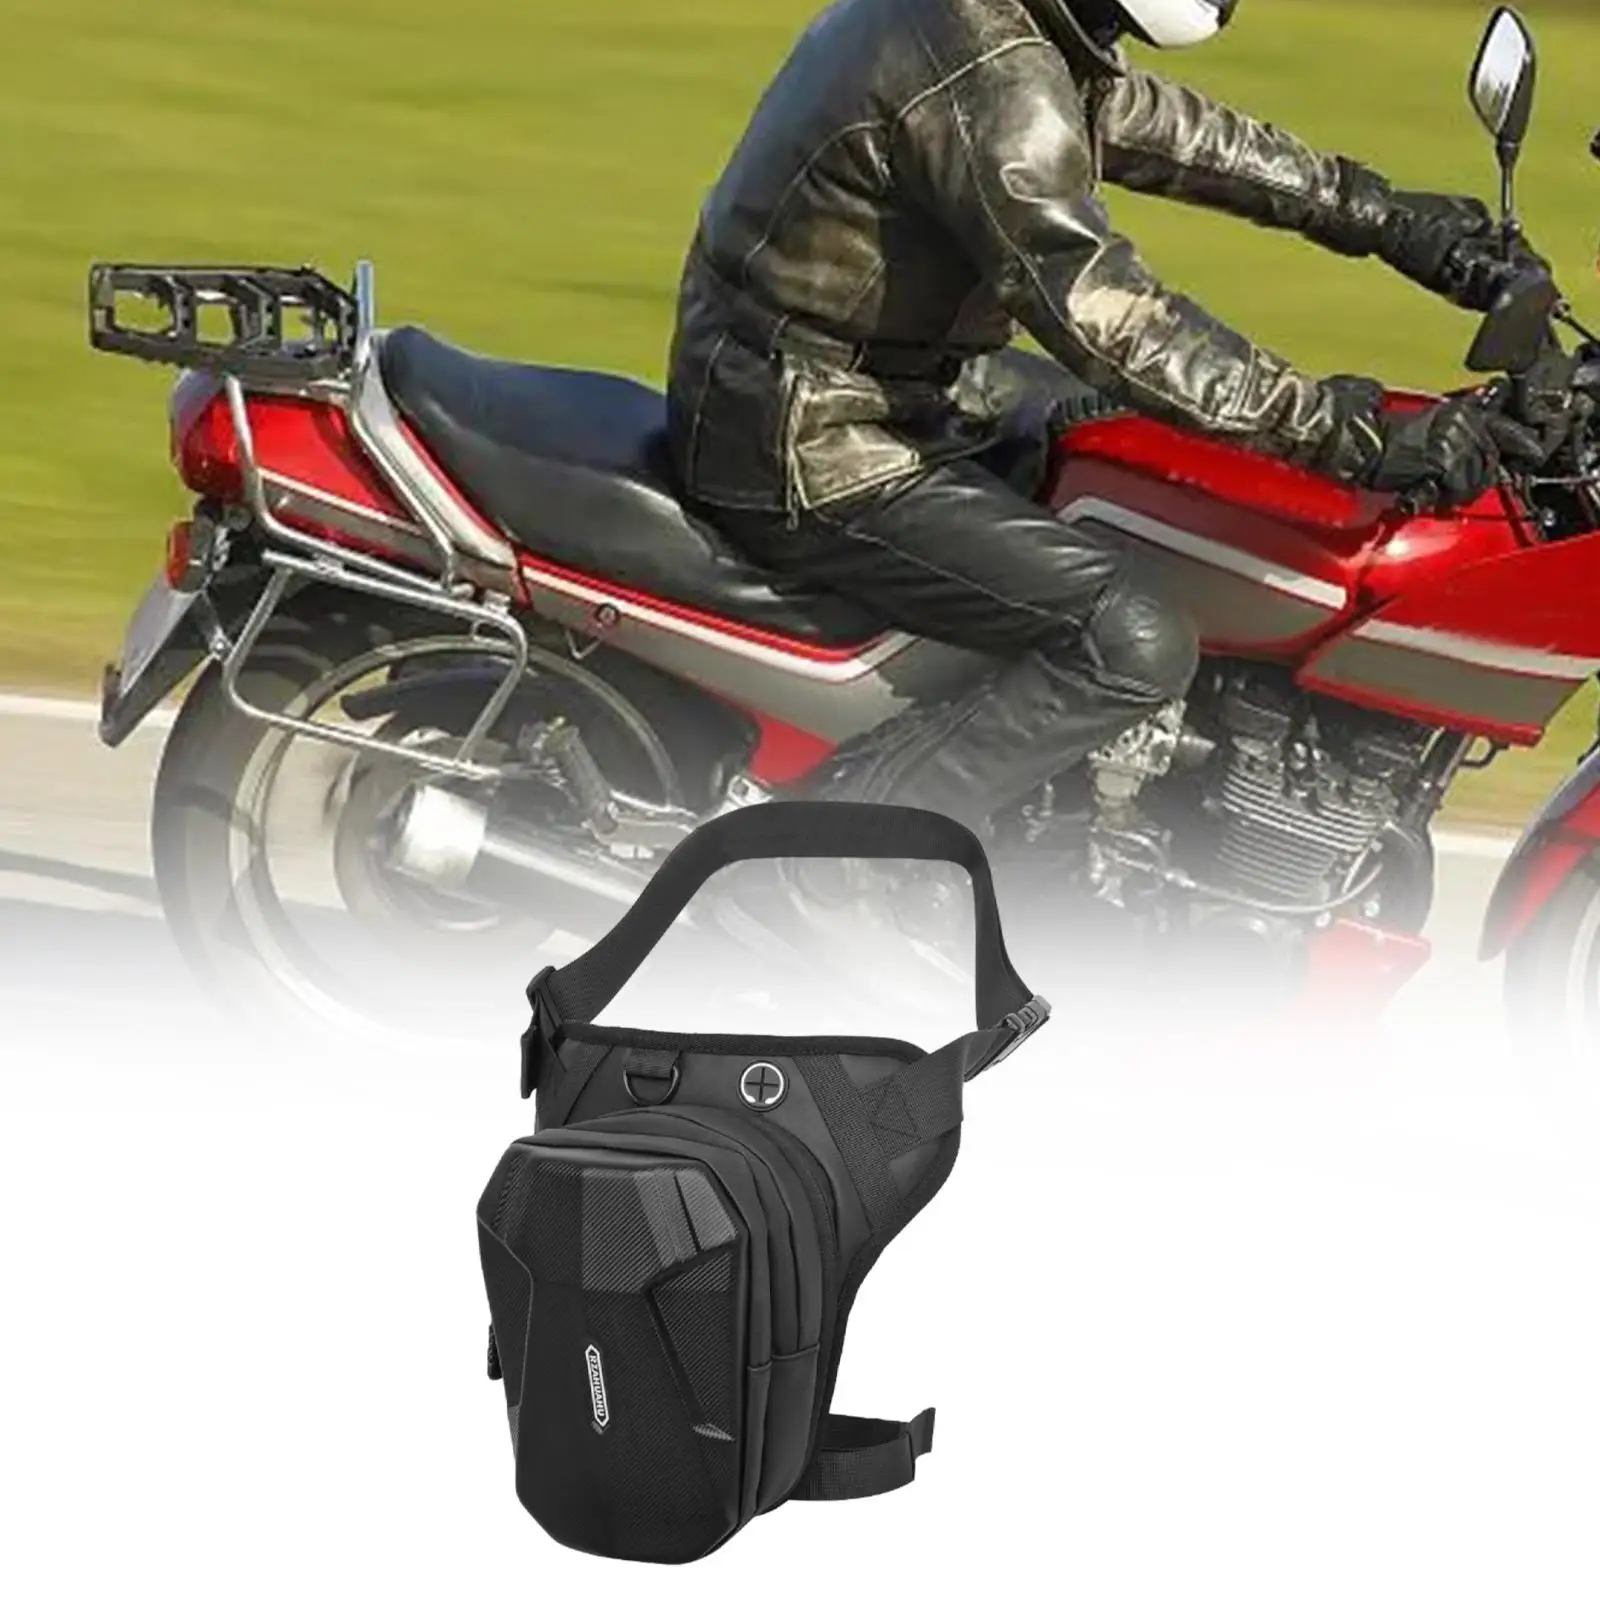 

Drop Leg Bag Motorcycle Black Thigh Packs for Riding Outdoor Traveling